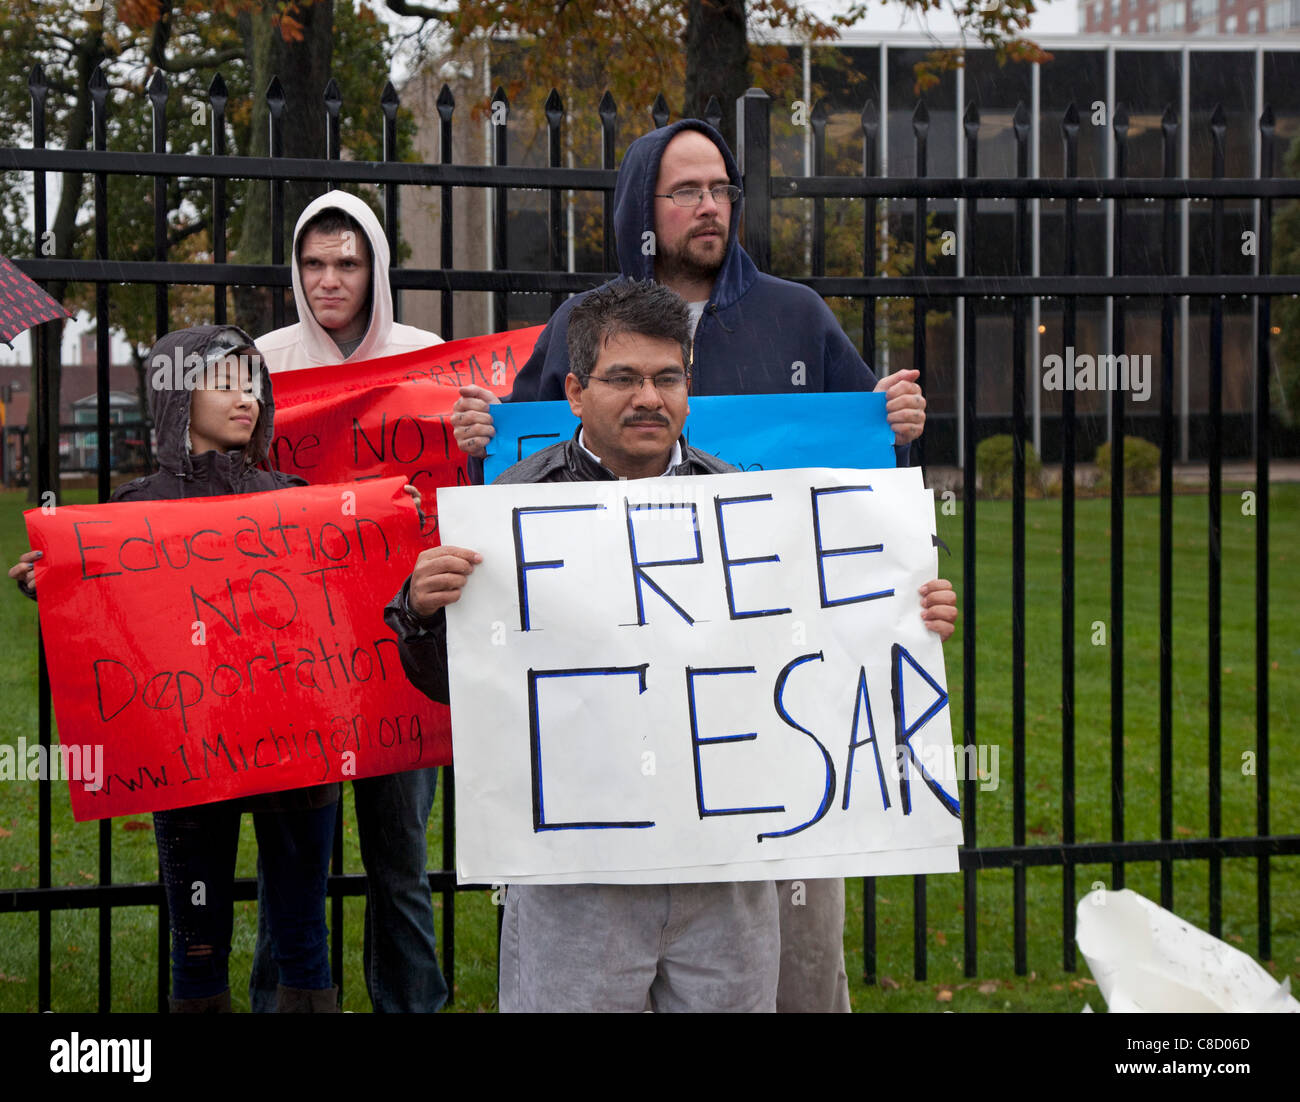 Detroit, Michigan - People picket the Immigration and Customs Enforcement office in a heavy rain storm to protest the pending deportation of Cesar Montoya. He was brought to the U.S. ten years ago at age 14, and would be eligible to stay under the DREAM Act, if passed by Congress. Stock Photo